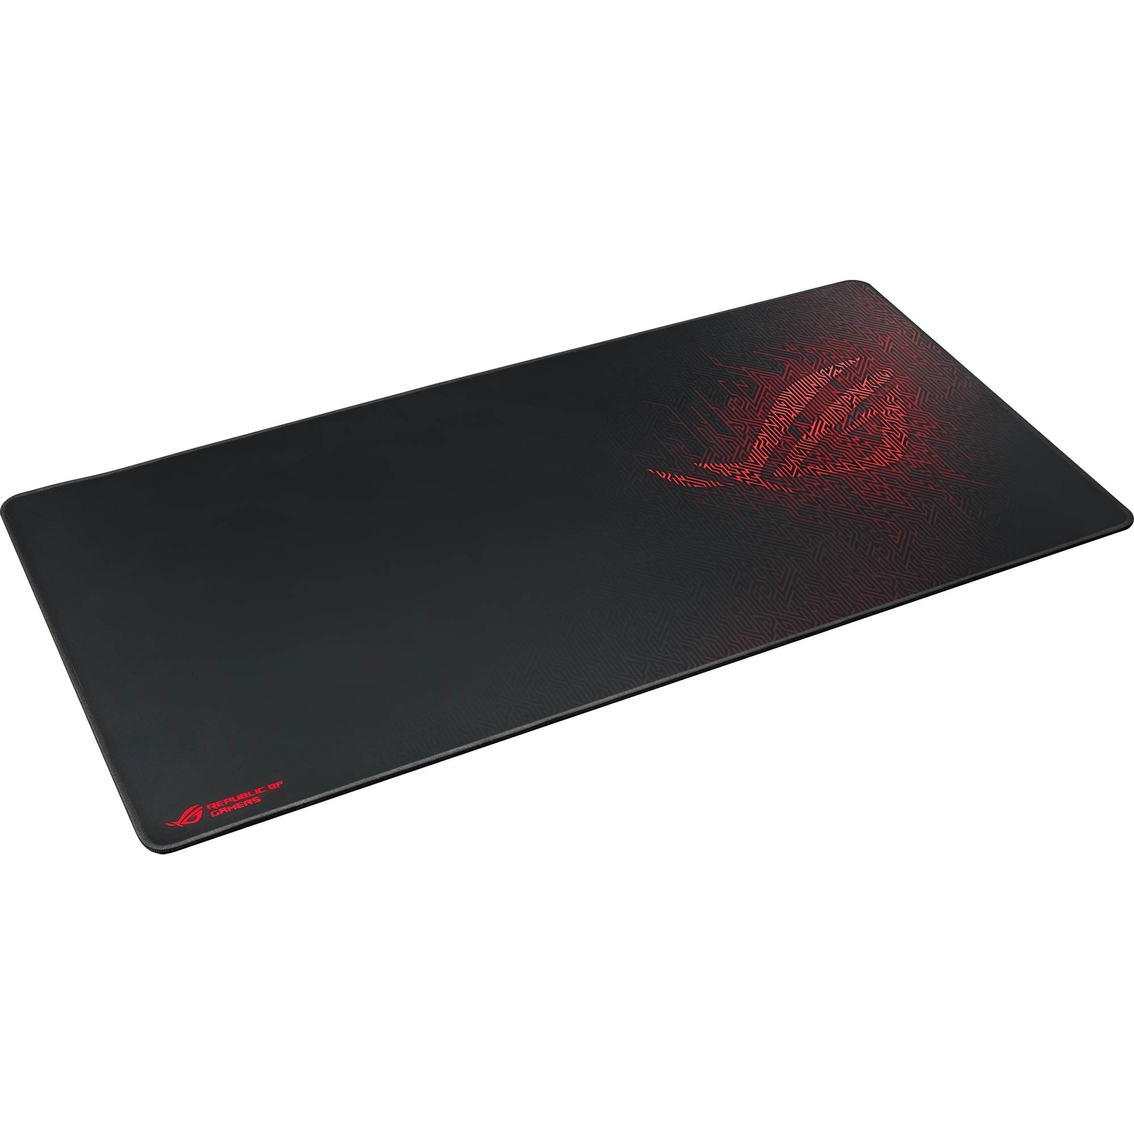 Asus ROG Sheath BLK Limited Edition Extra-Large Gaming Surface Mouse Pad - Image 3 of 9